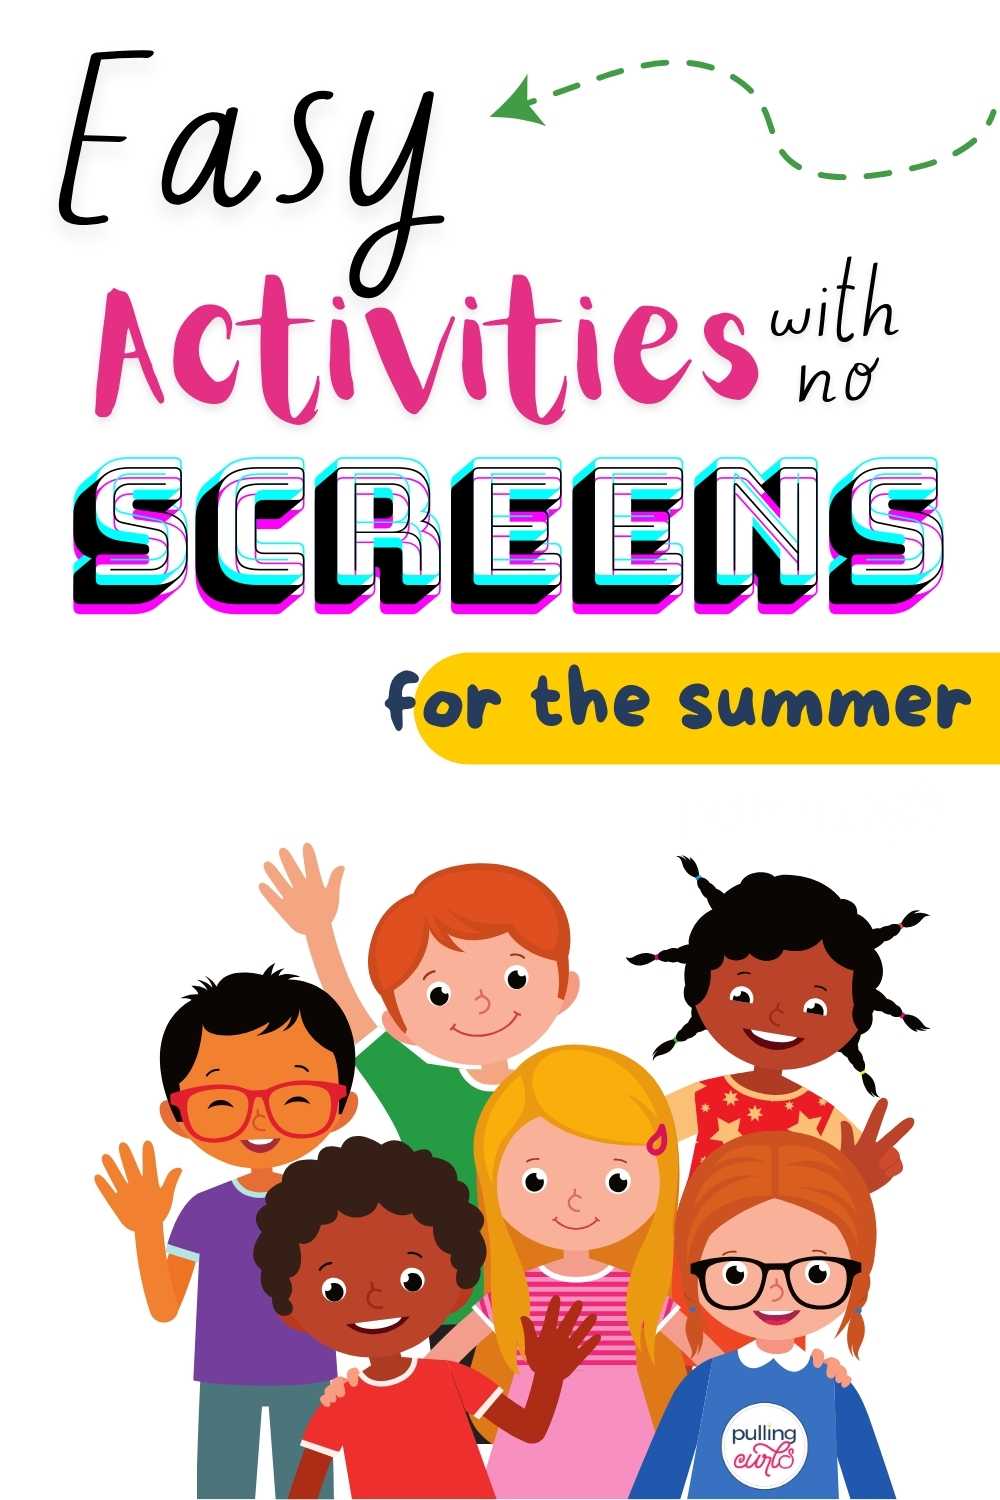 happy kids // easy activities without screens for the summer! via @pullingcurls